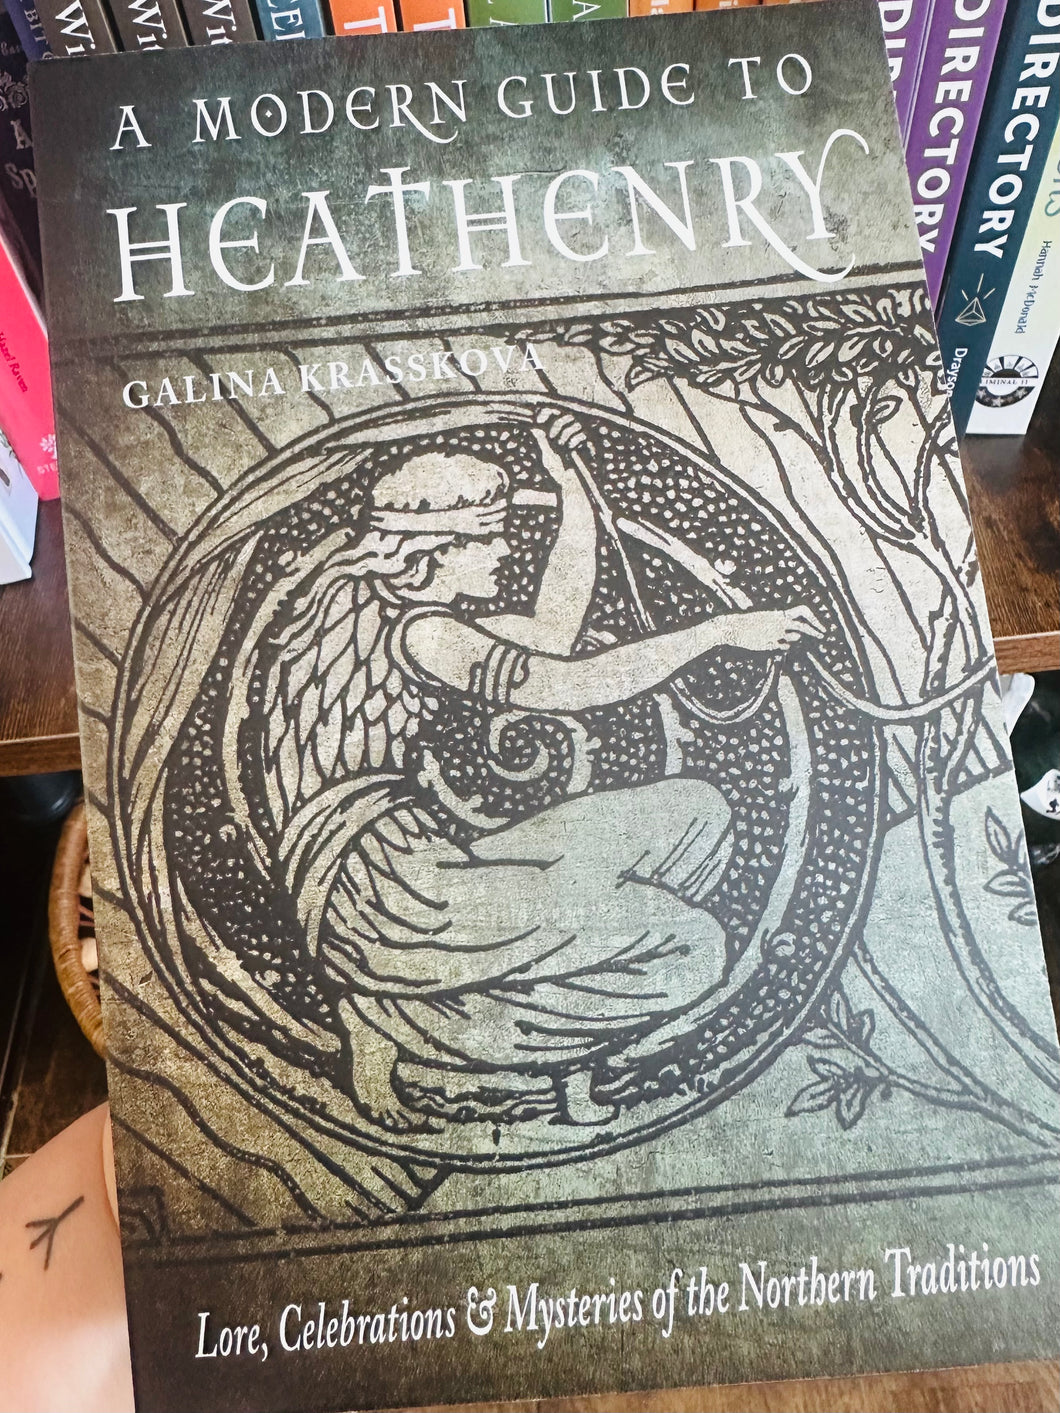 A modern guide to Heathenry